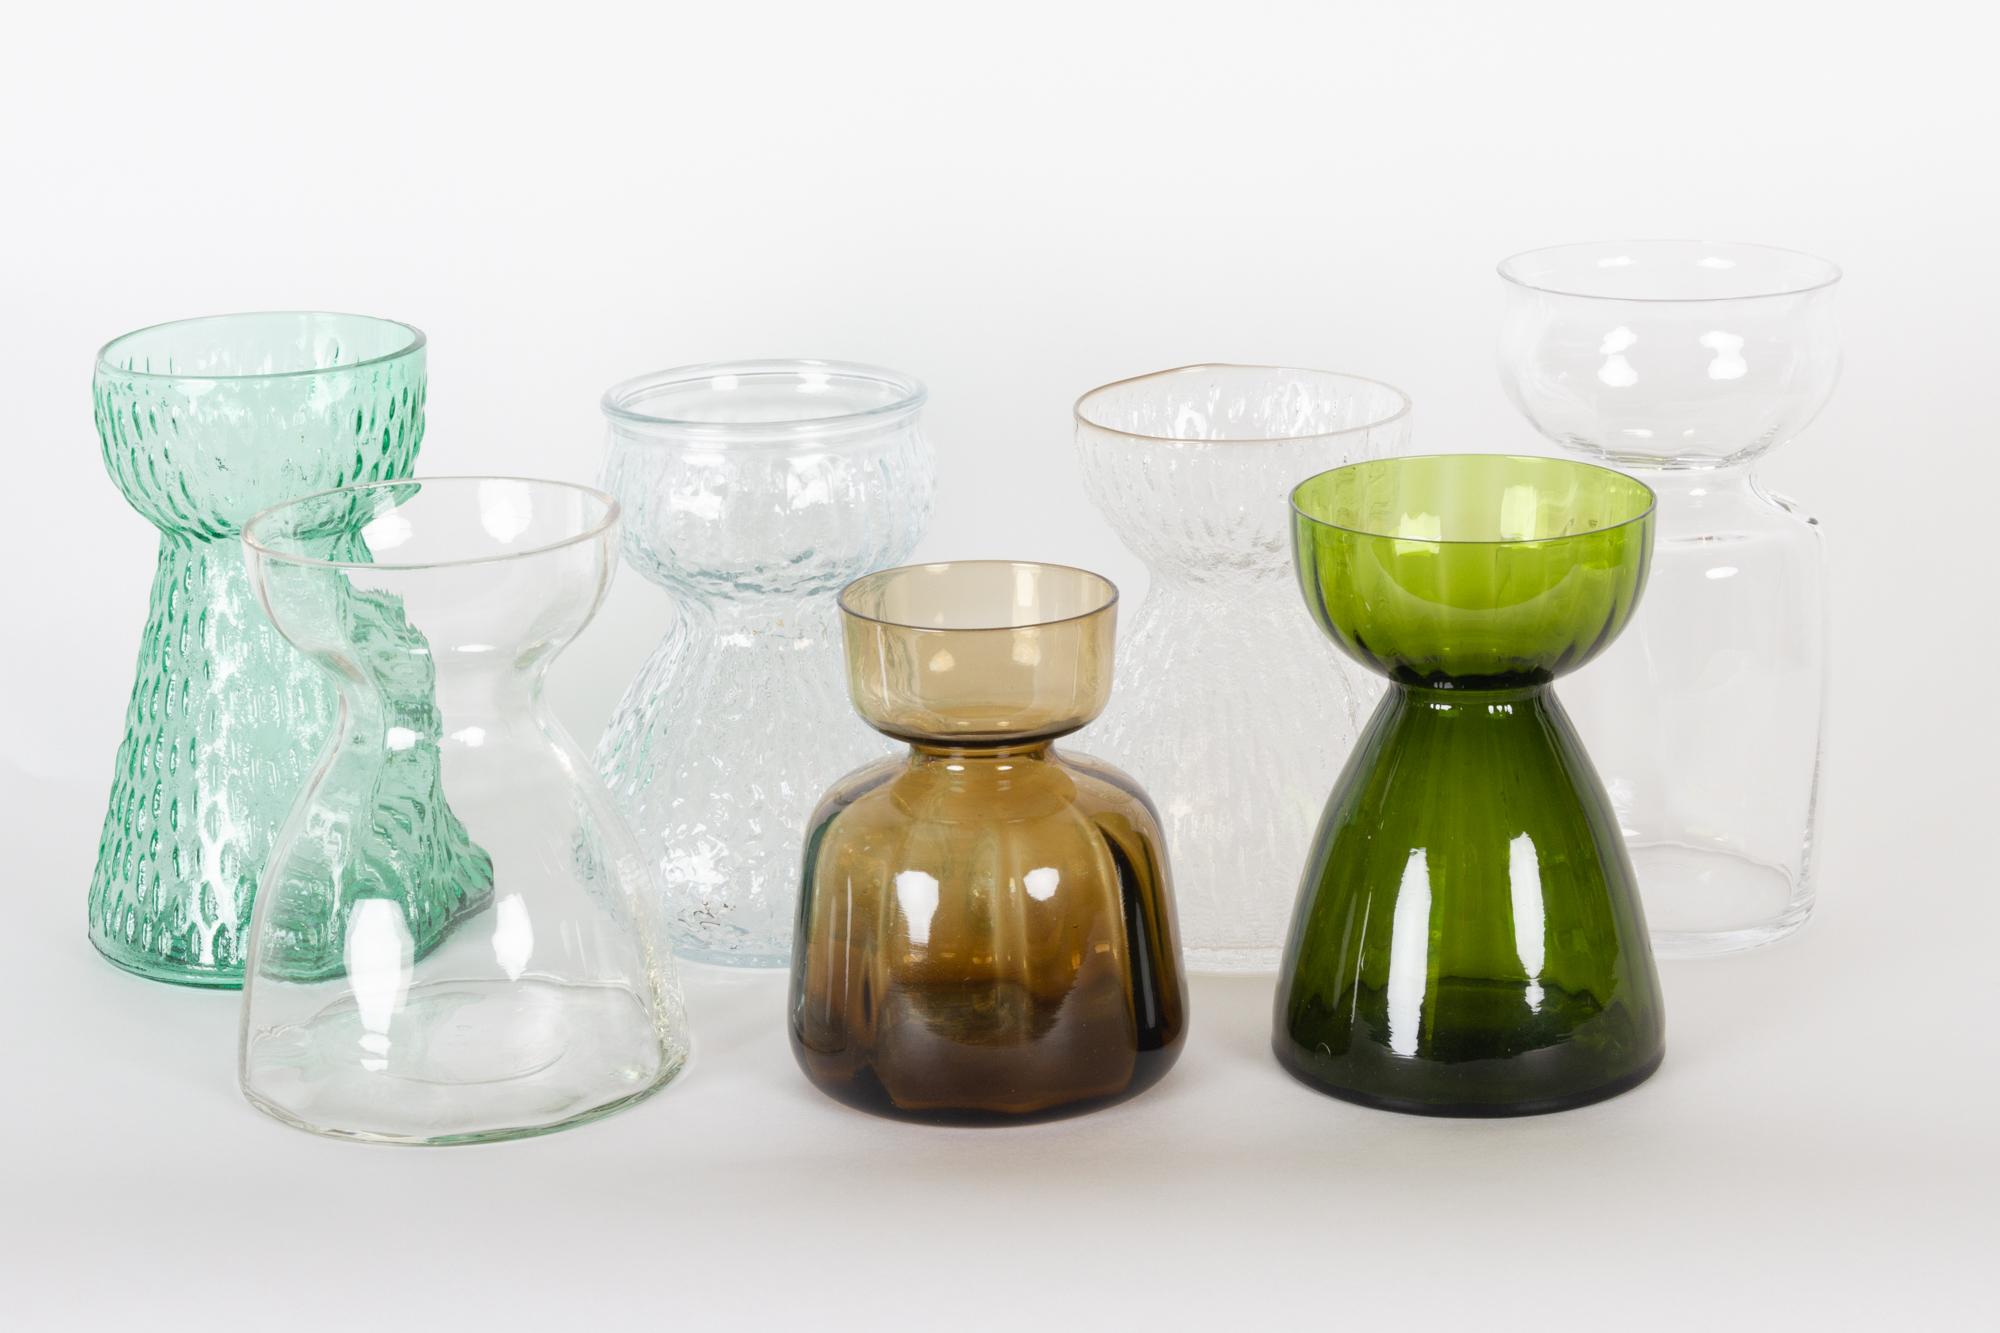 Vintage Scandinavian Hyacinth glass vases, 1960s
Set of seven Mid-Century Modern vases. This type of vases was very common in Scandinavia where they were used for hyacinths. The flower bulb is supported on the top of the vase, and the roots extends